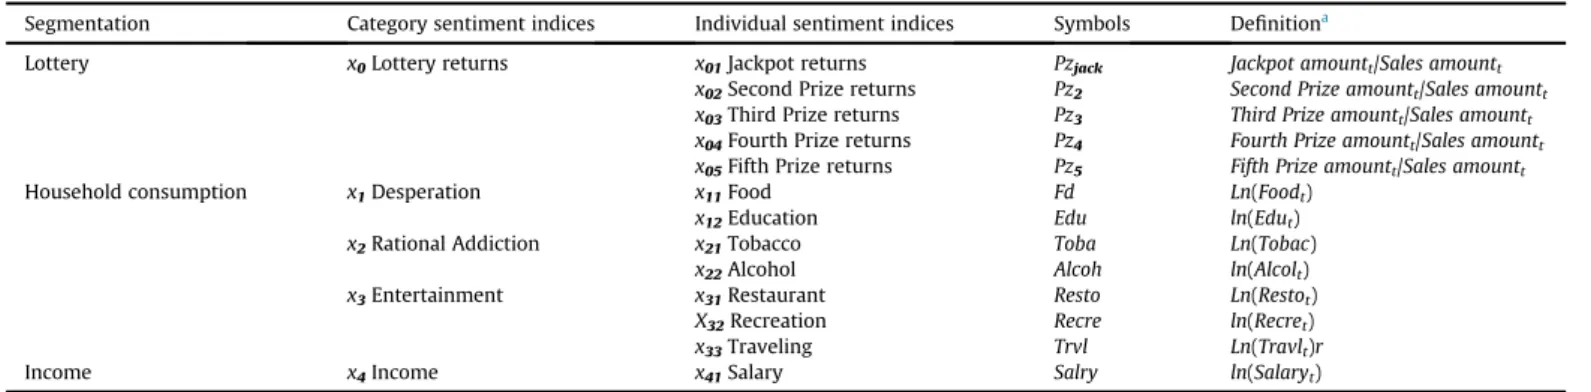 Table 3 lists the four categories of sentiment indices, namely desperation category, rational addiction category, entertainment category, and income category, and ranks them according to Grey relational grades for all prize returns throughout all study per